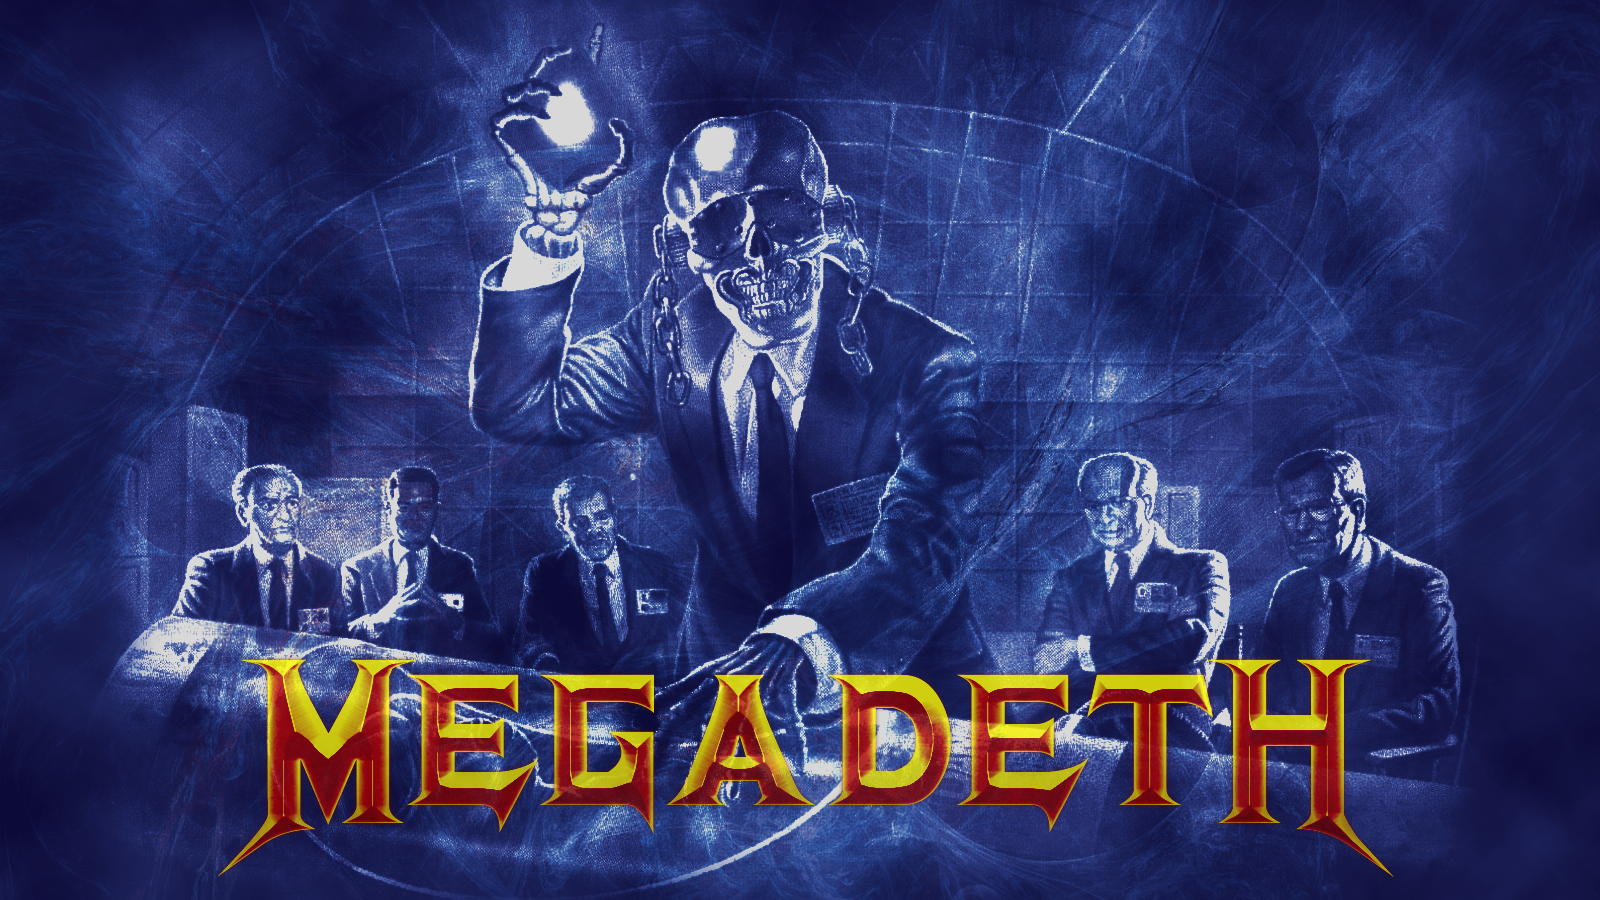 84 Megadeth HD Wallpapers | Backgrounds - Wallpaper Abyss - Page 3